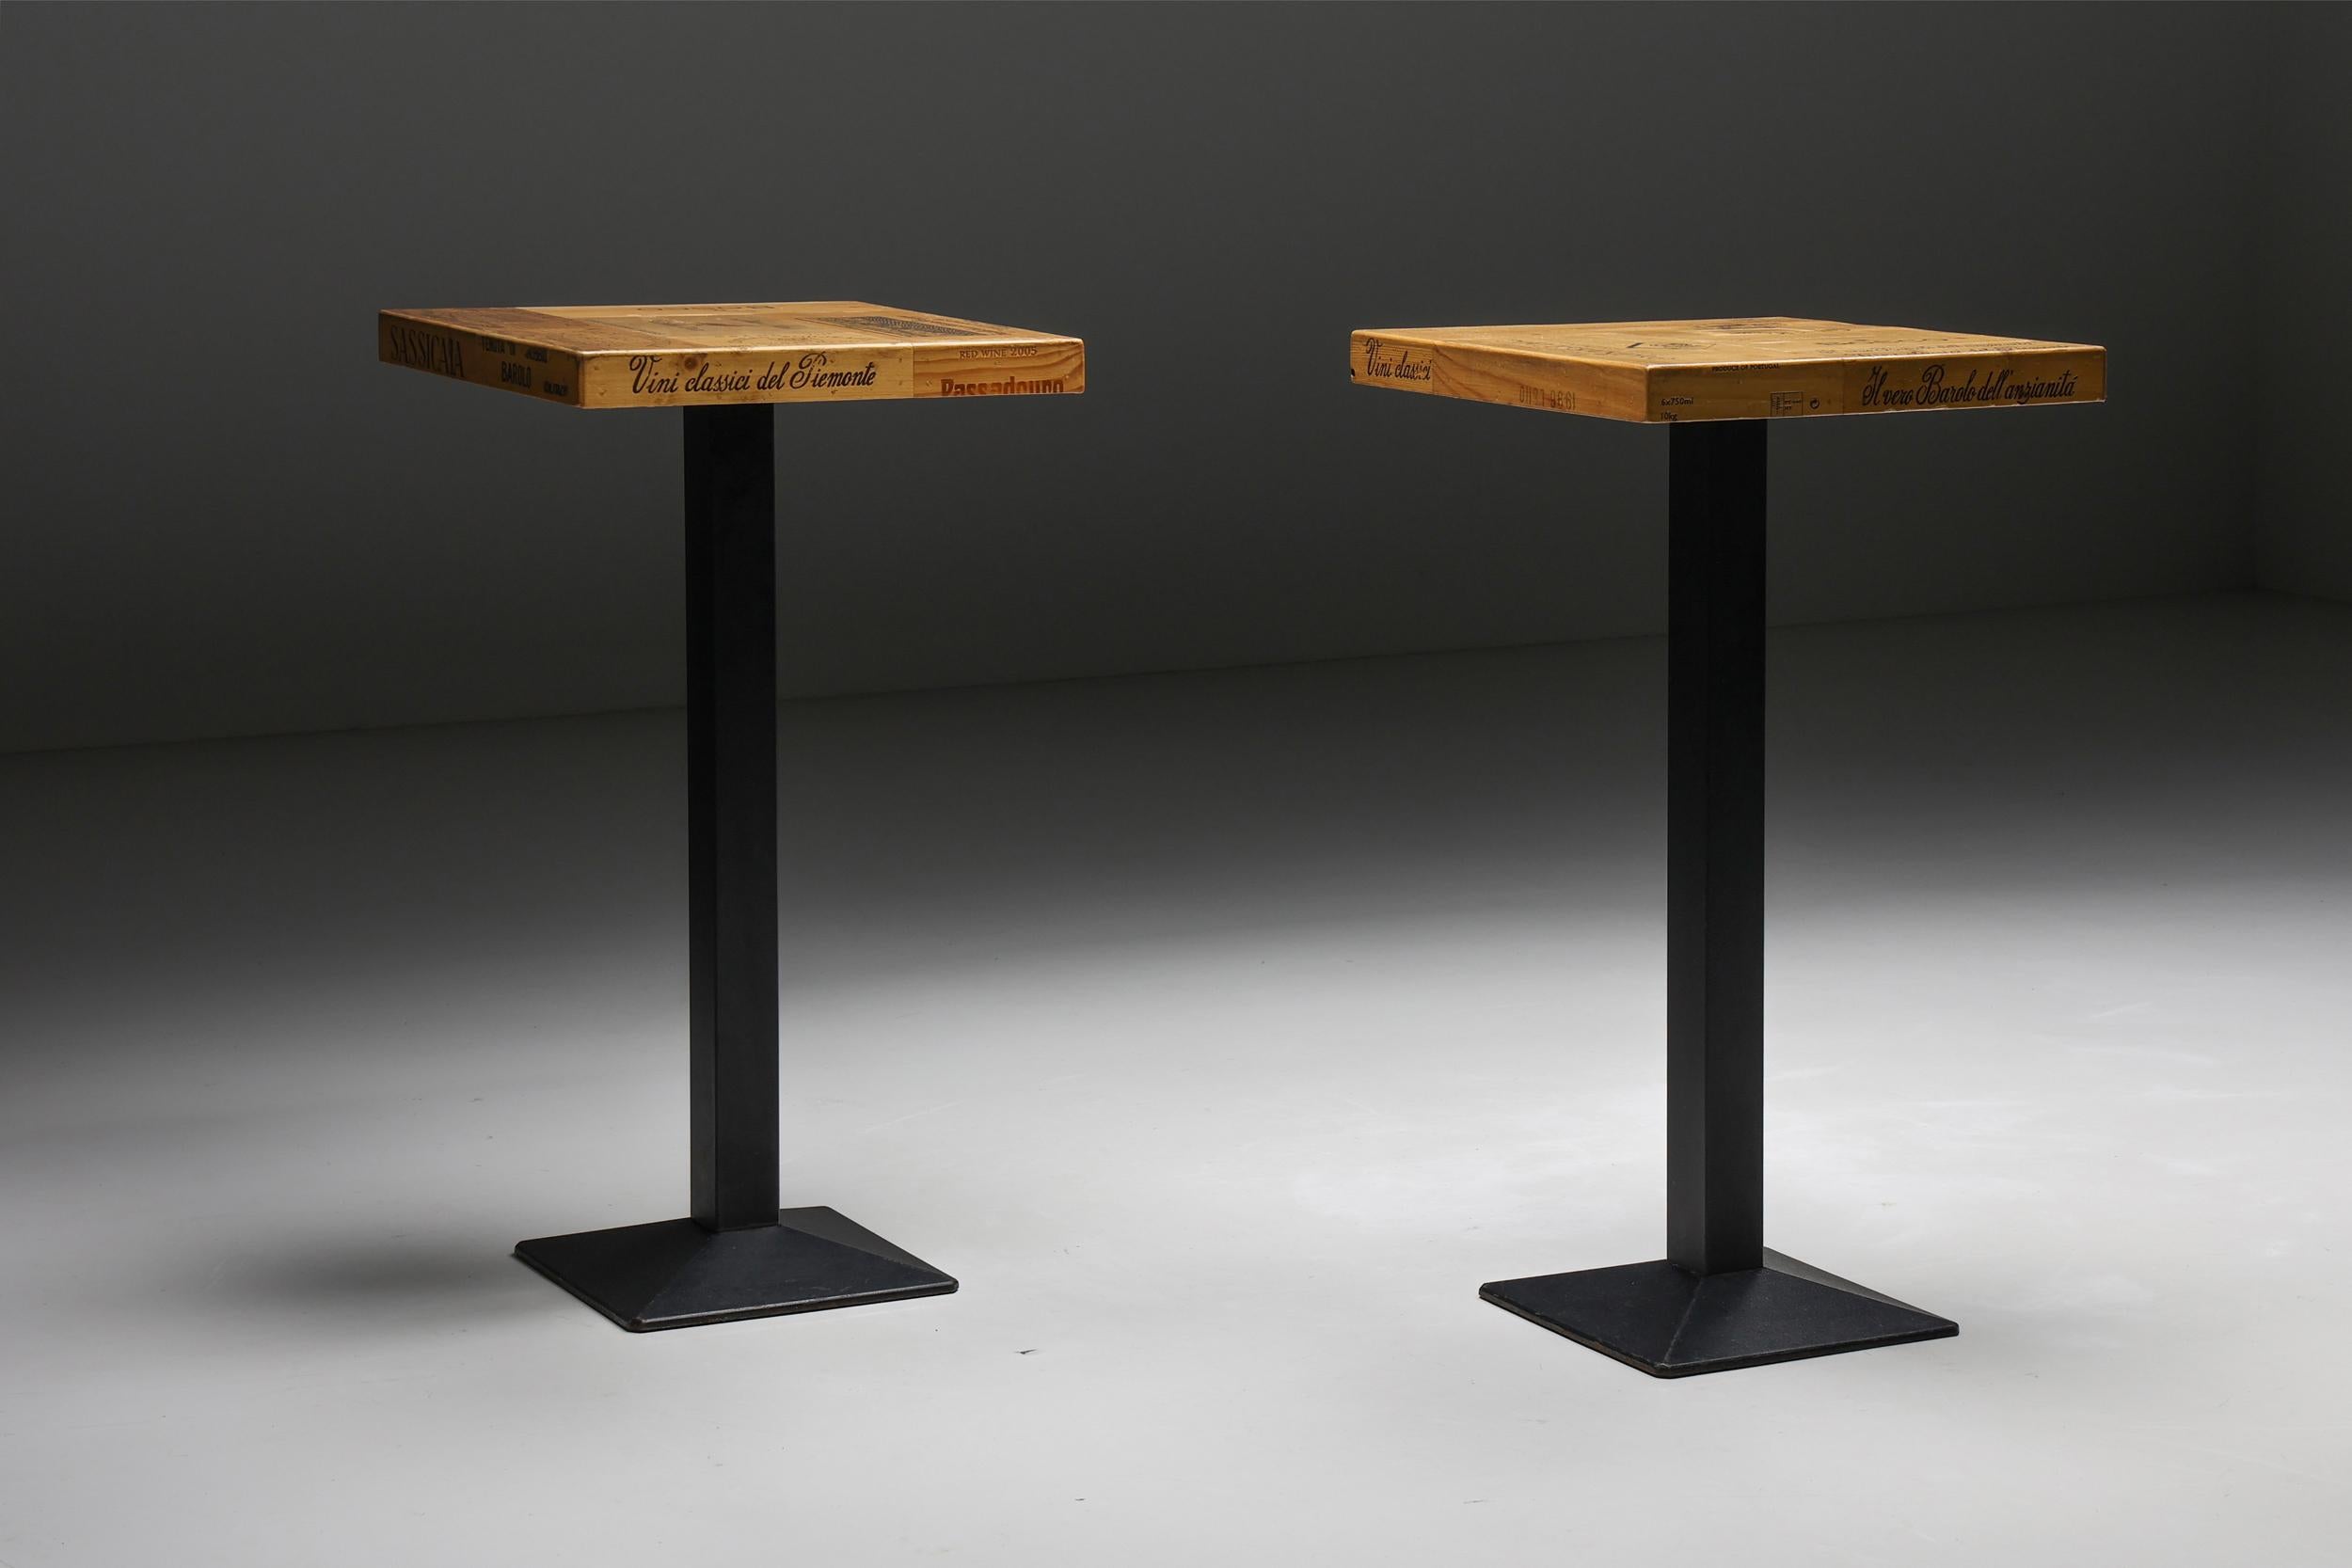 Artisan Tables Hautes Travail Belge, Early 2000s In Excellent Condition For Sale In Antwerp, BE